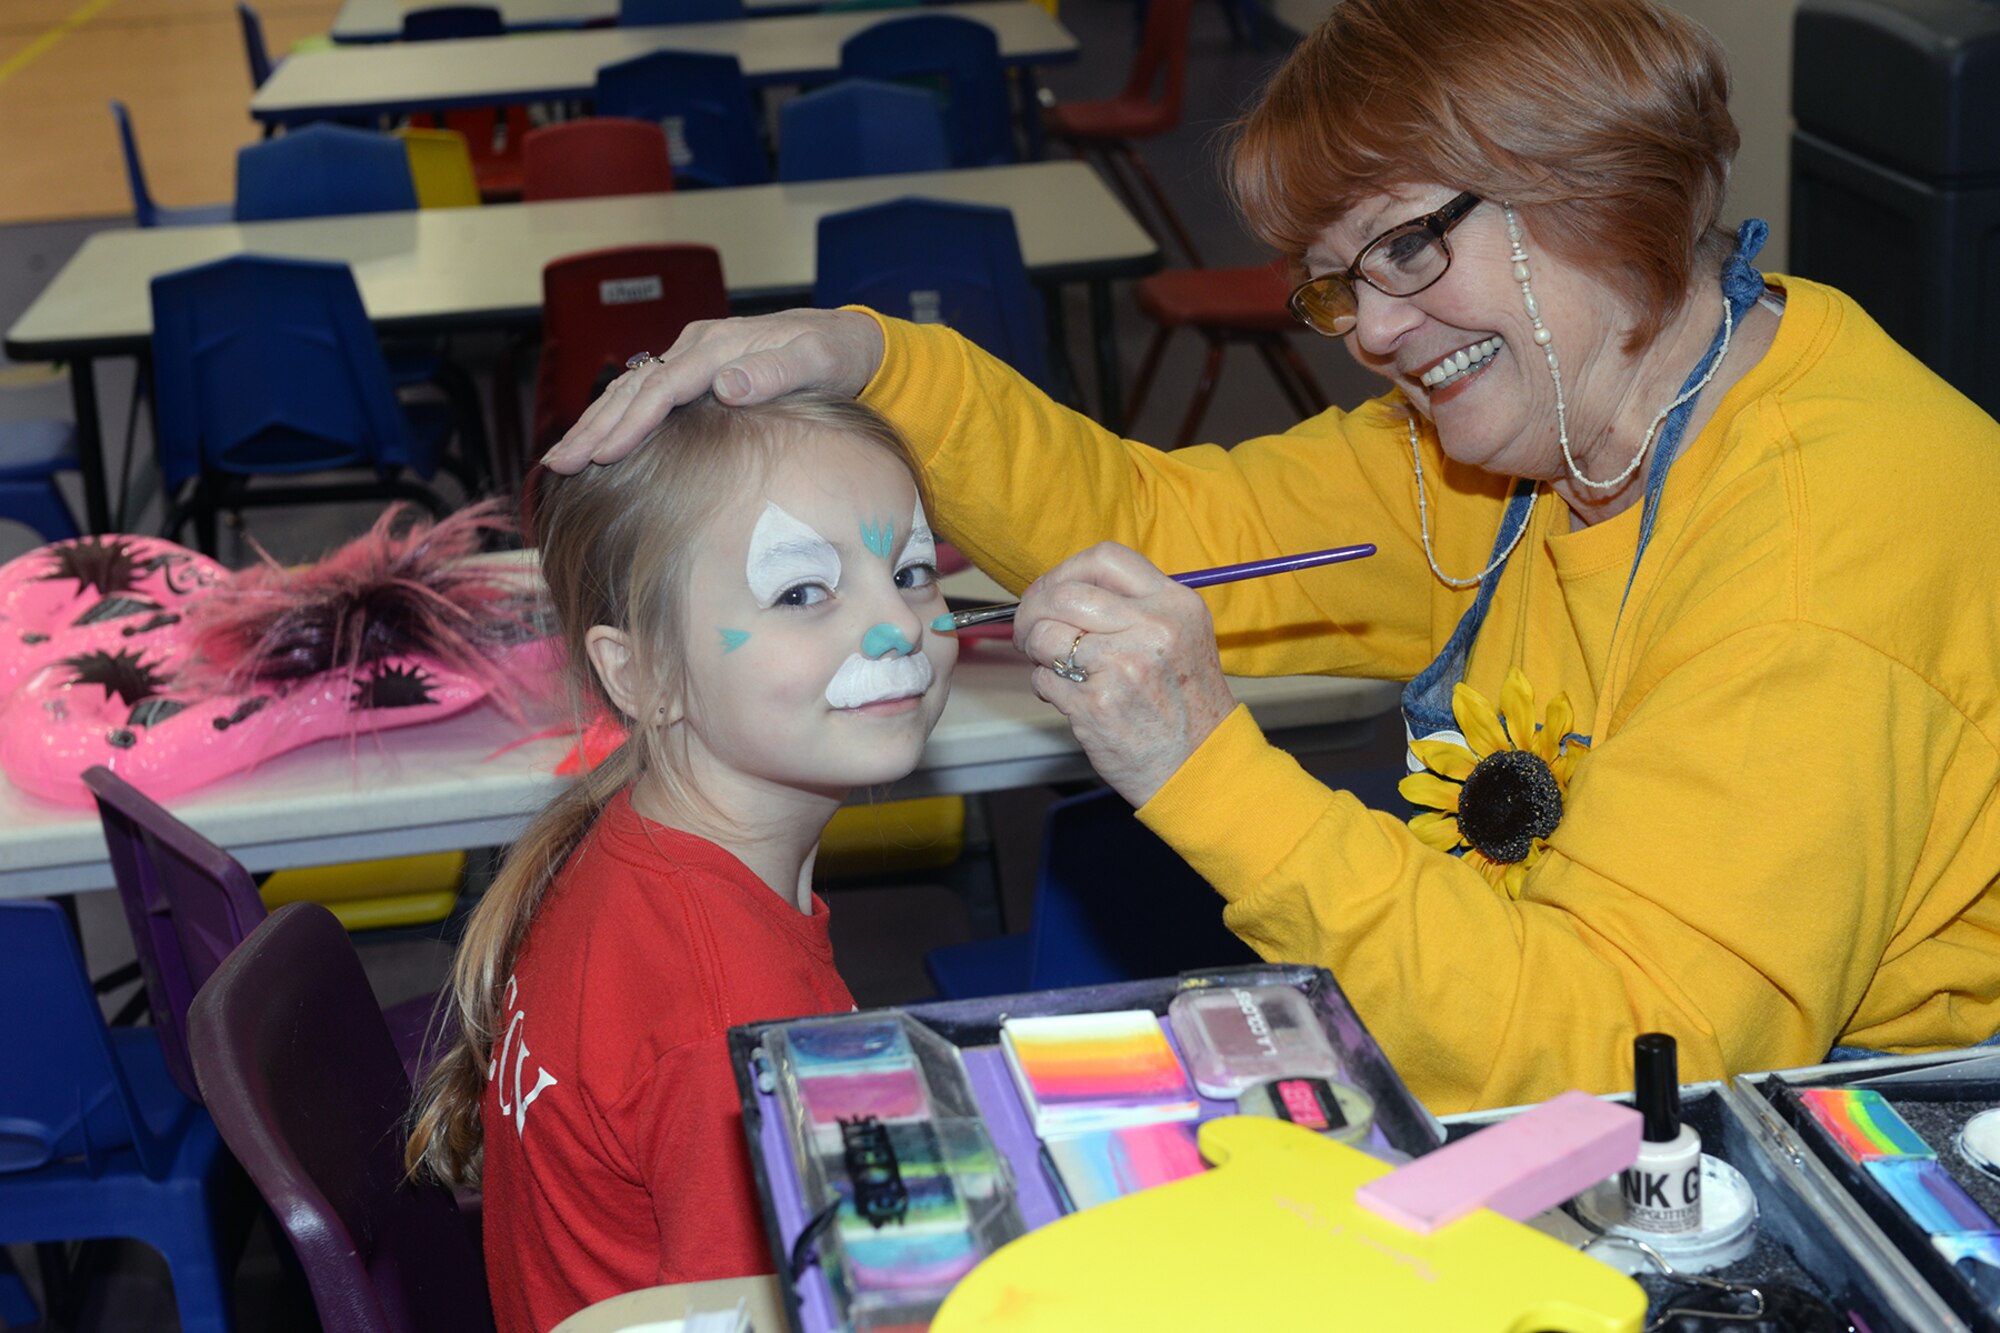 Ruth Merwald, Giggles the clown, paints a child’s face April 9, 2019 at the Bellevue Lied Center, Nebraska. The 6th Annual Special Needs Fair also offered food and vendors. (U.S. Air Force photo by Kendra Williams)